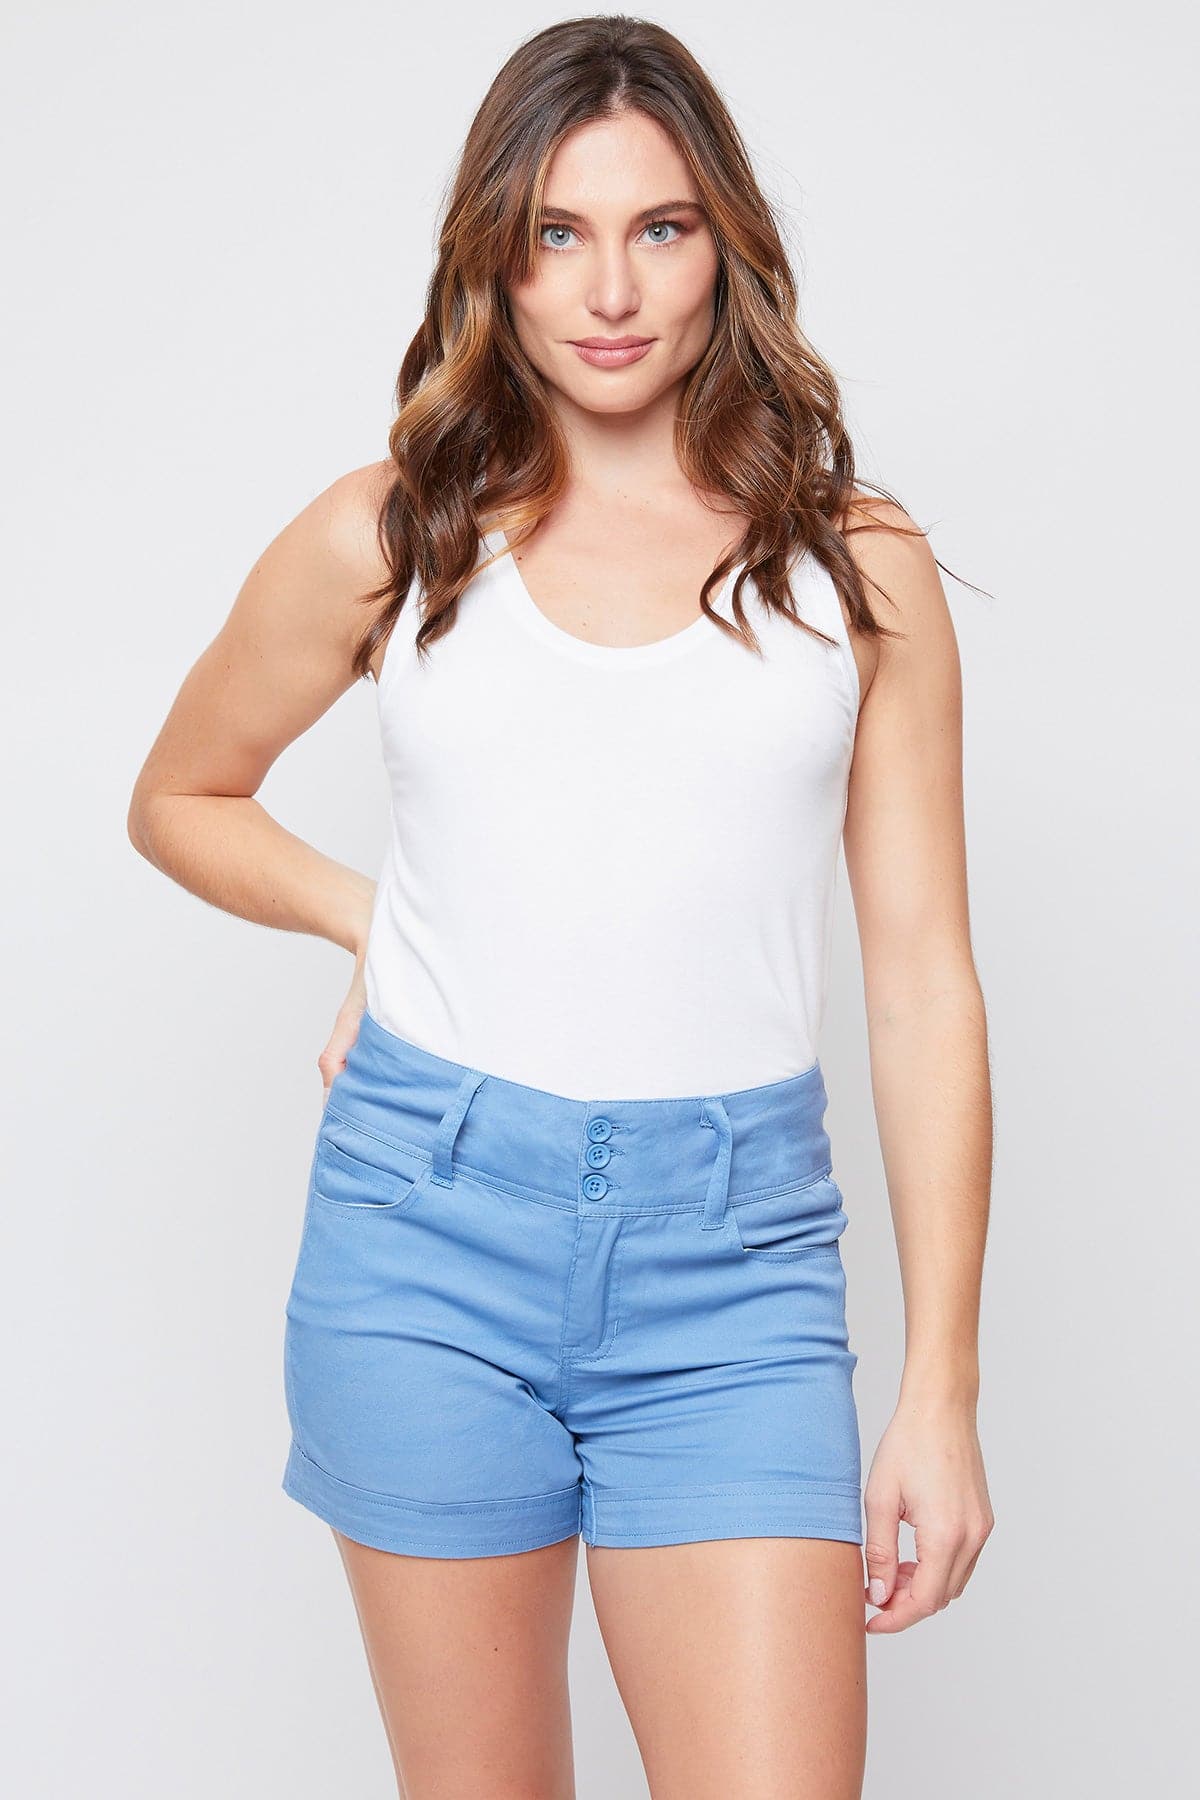 Women's Petite 3-Button Short With Banded Hem